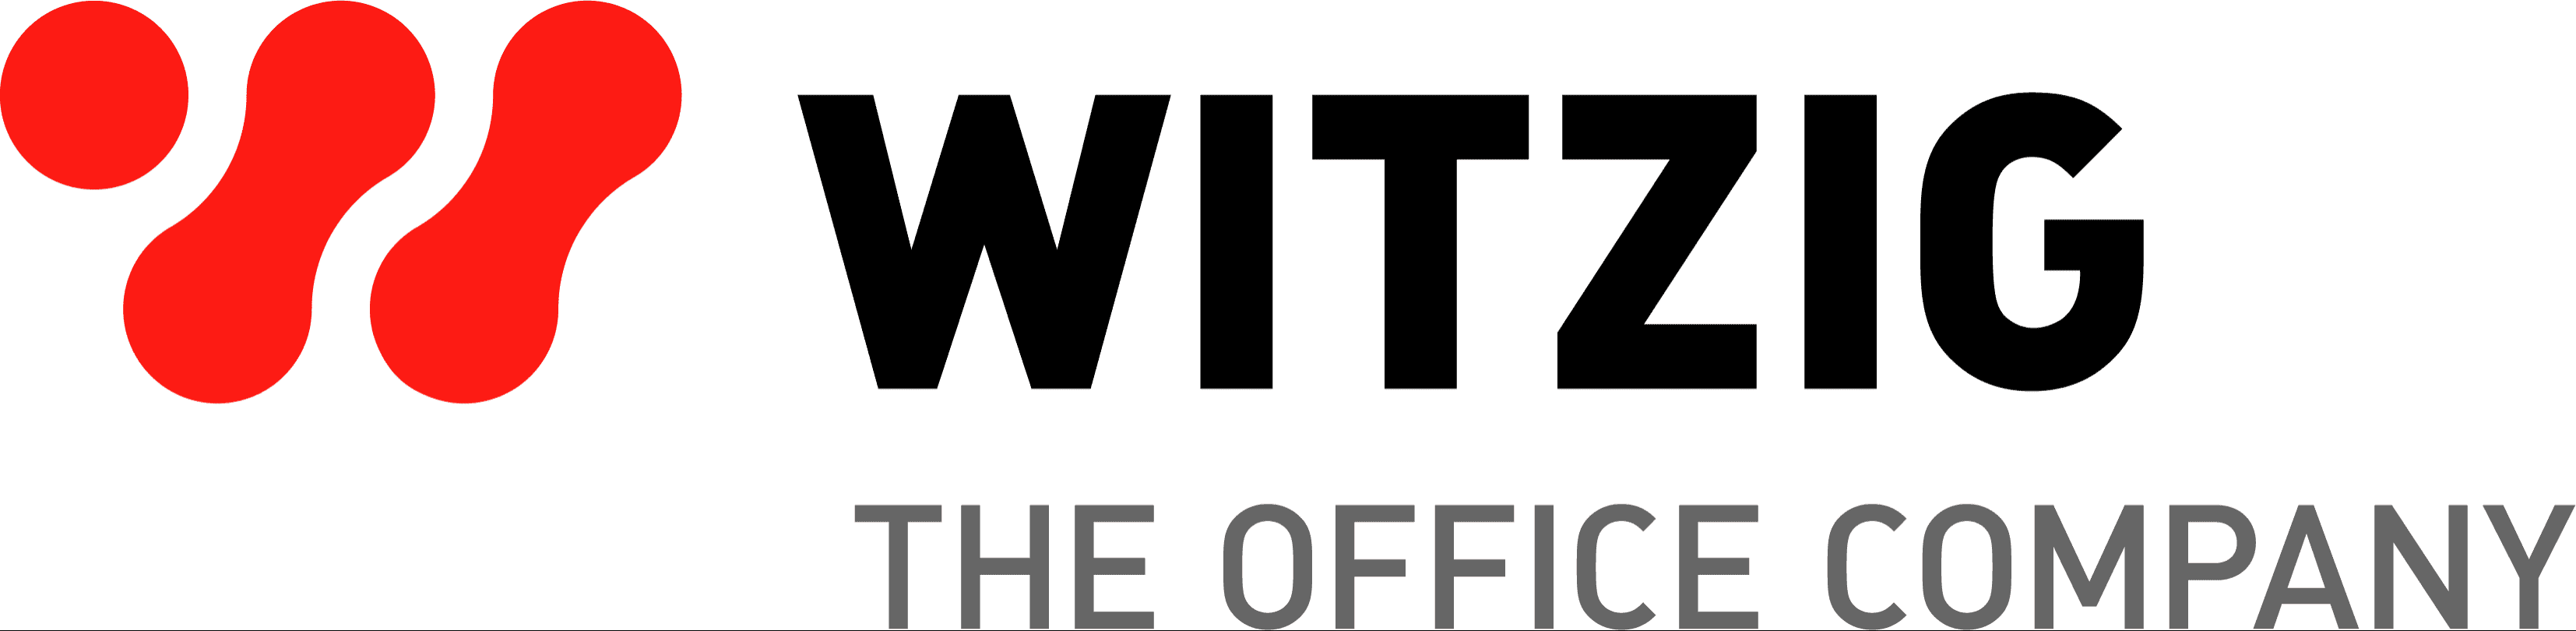 Witzig The Office Company